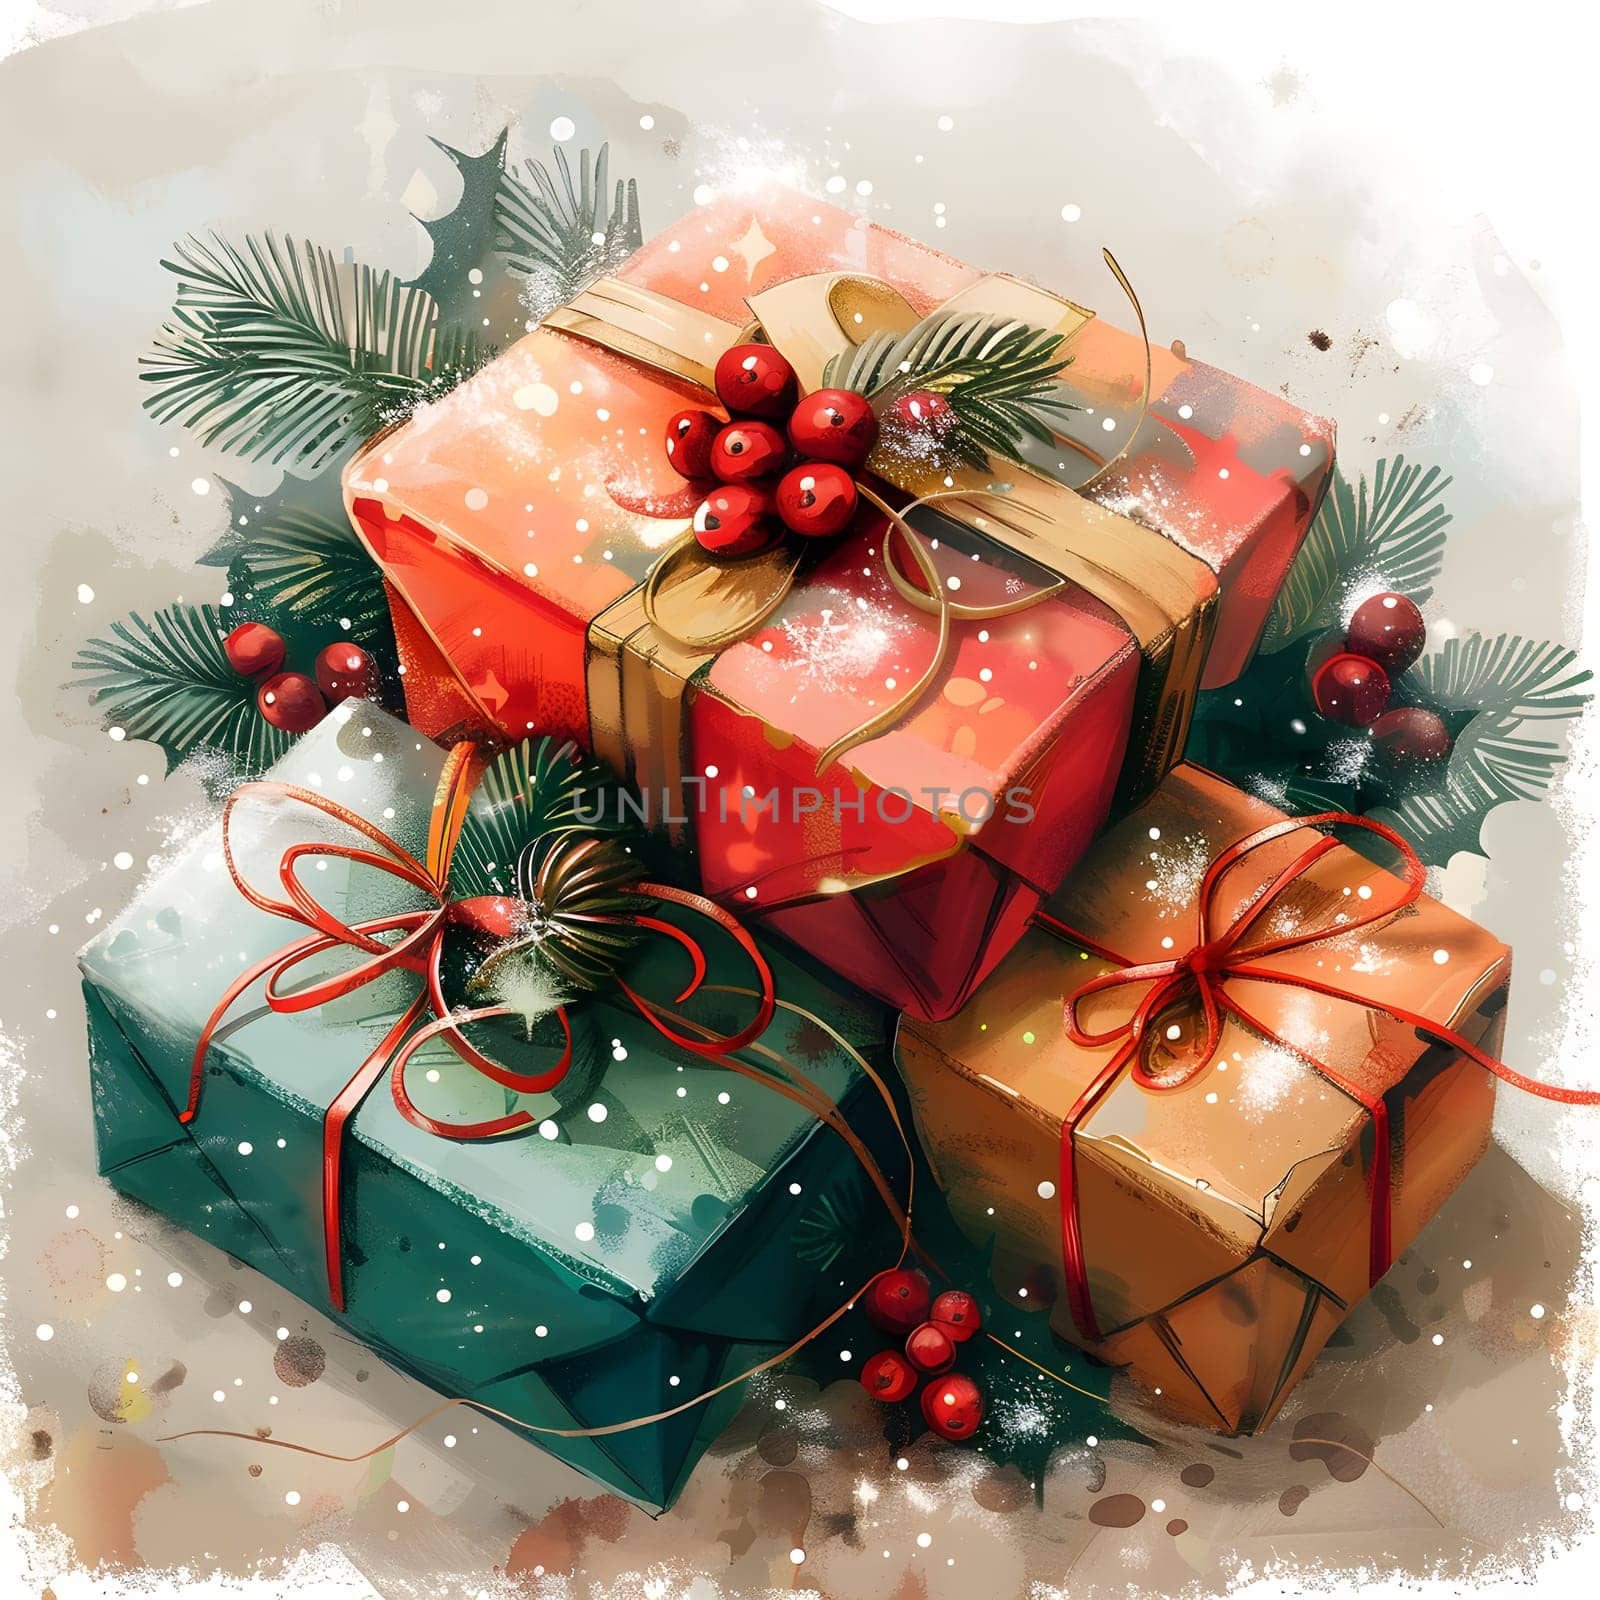 A stack of Christmas ornaments, plants, food, and gift wrapping by Nadtochiy